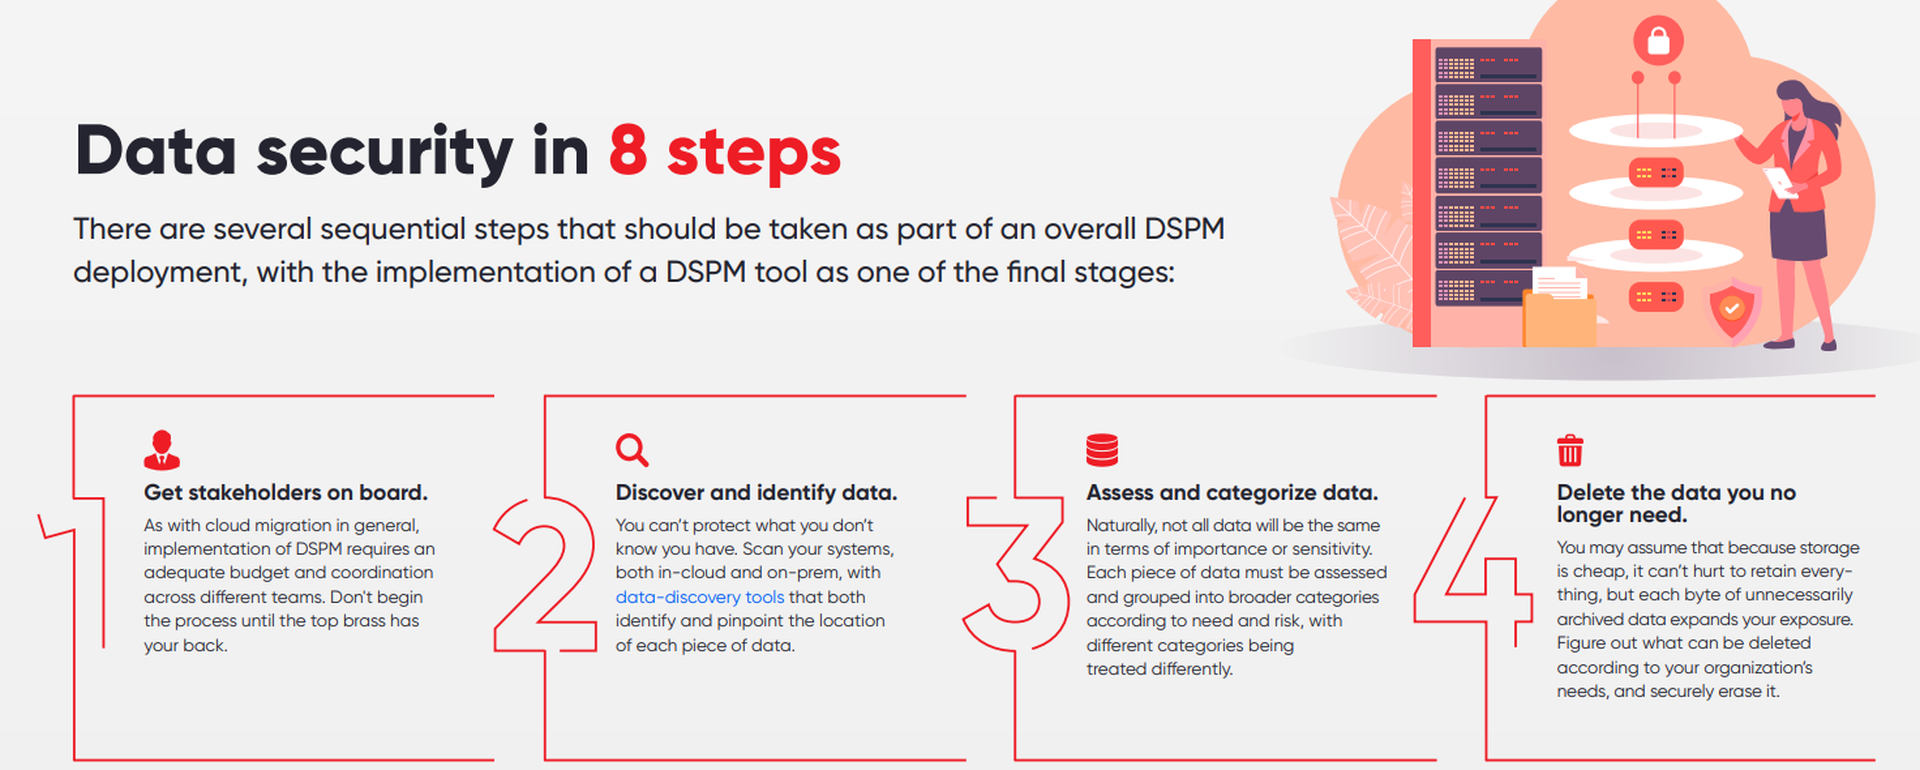 Data security in 8 steps